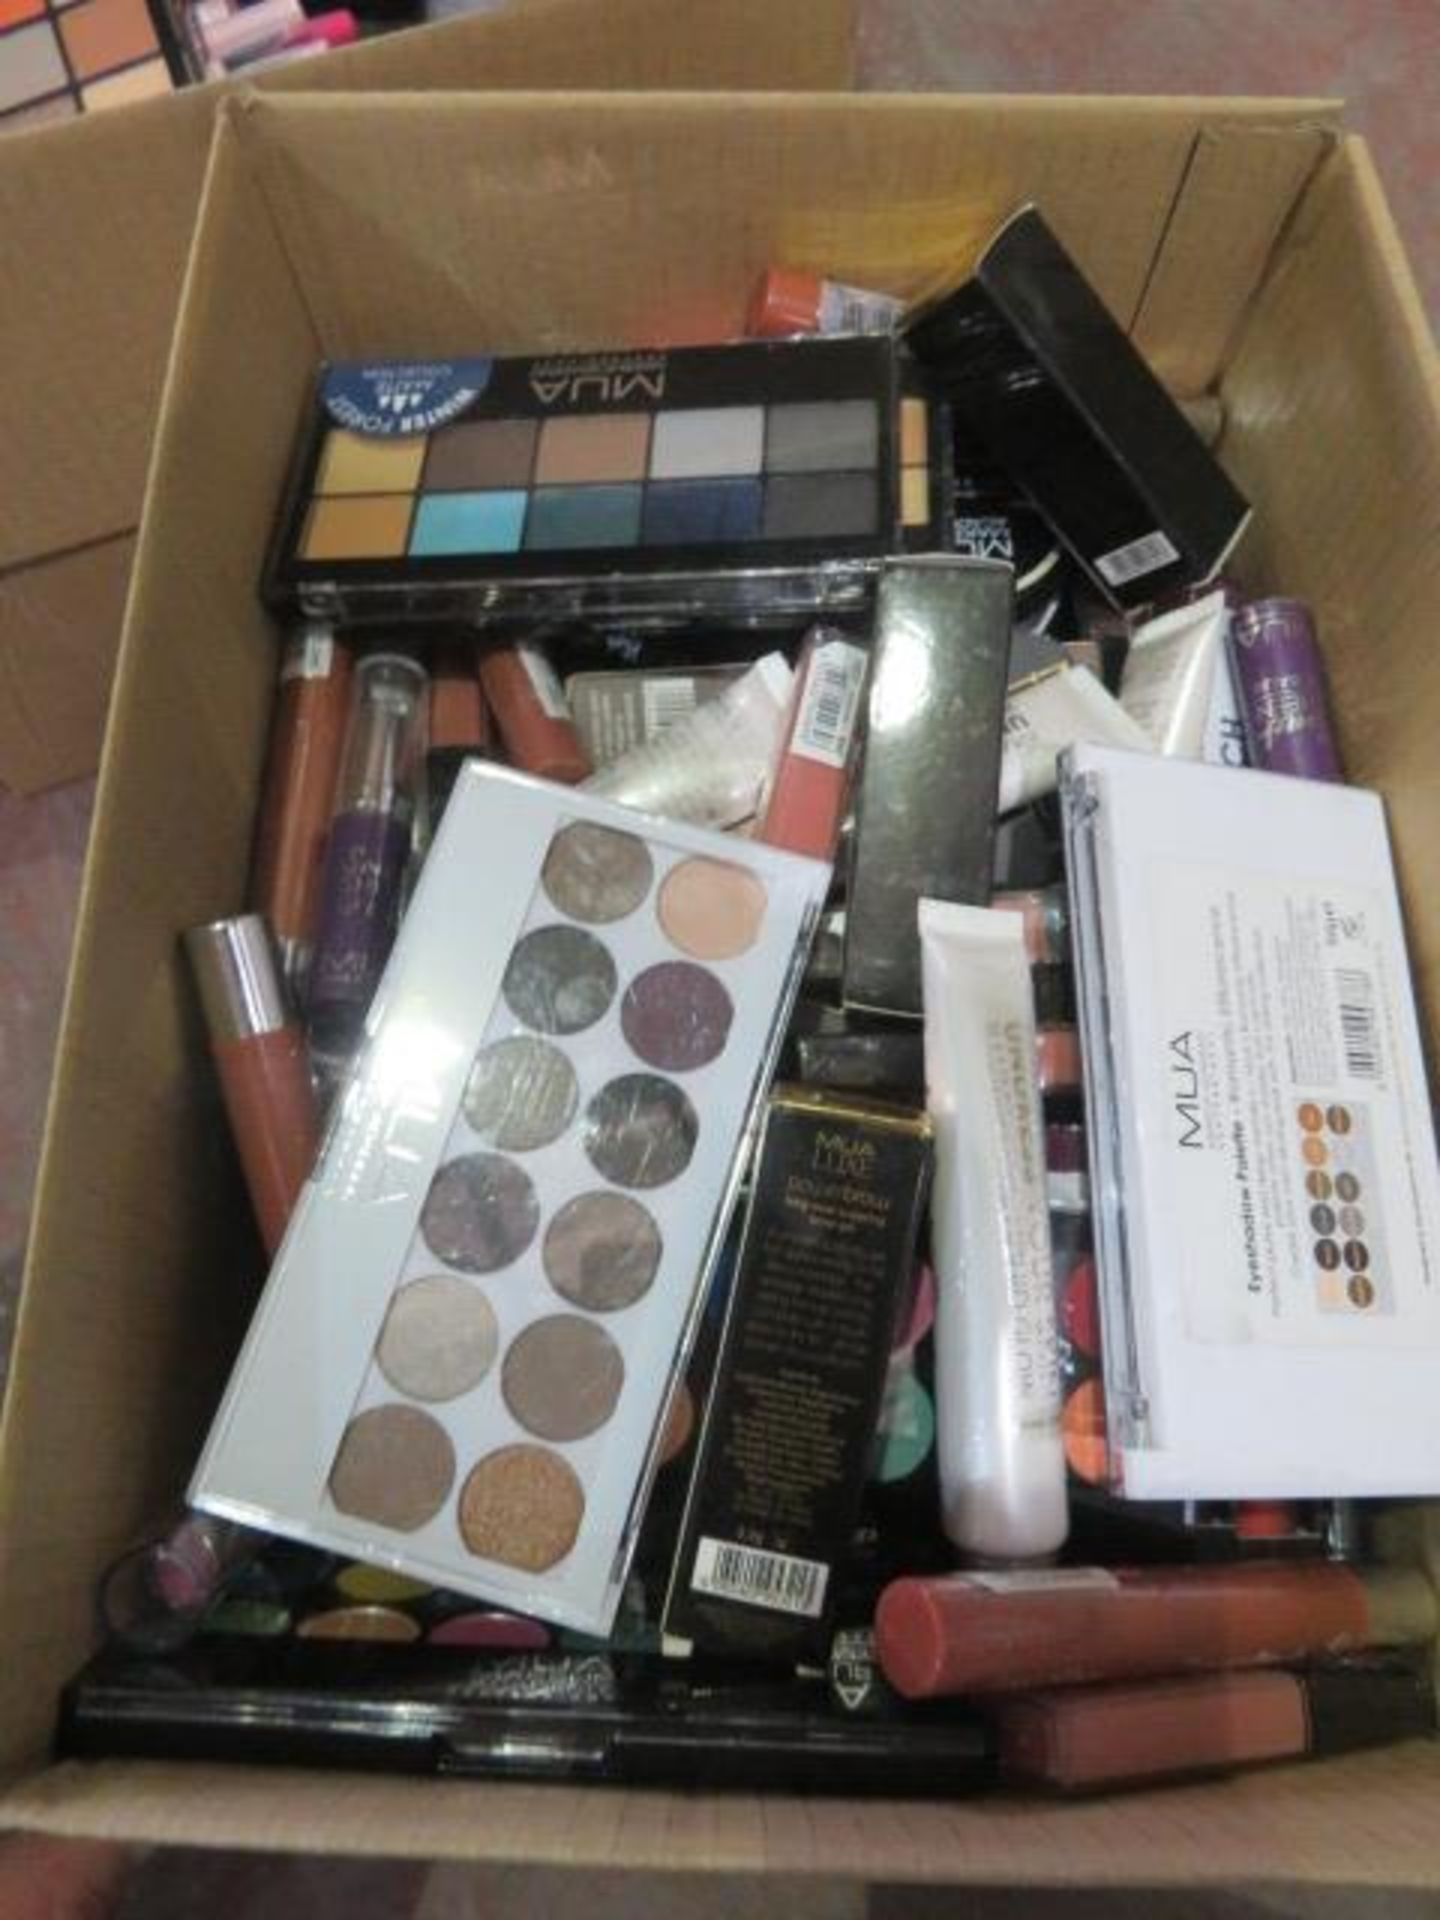 (Z90) Circa. 200 items of various new make up acadamy make up to include: eye shadow palette, i...